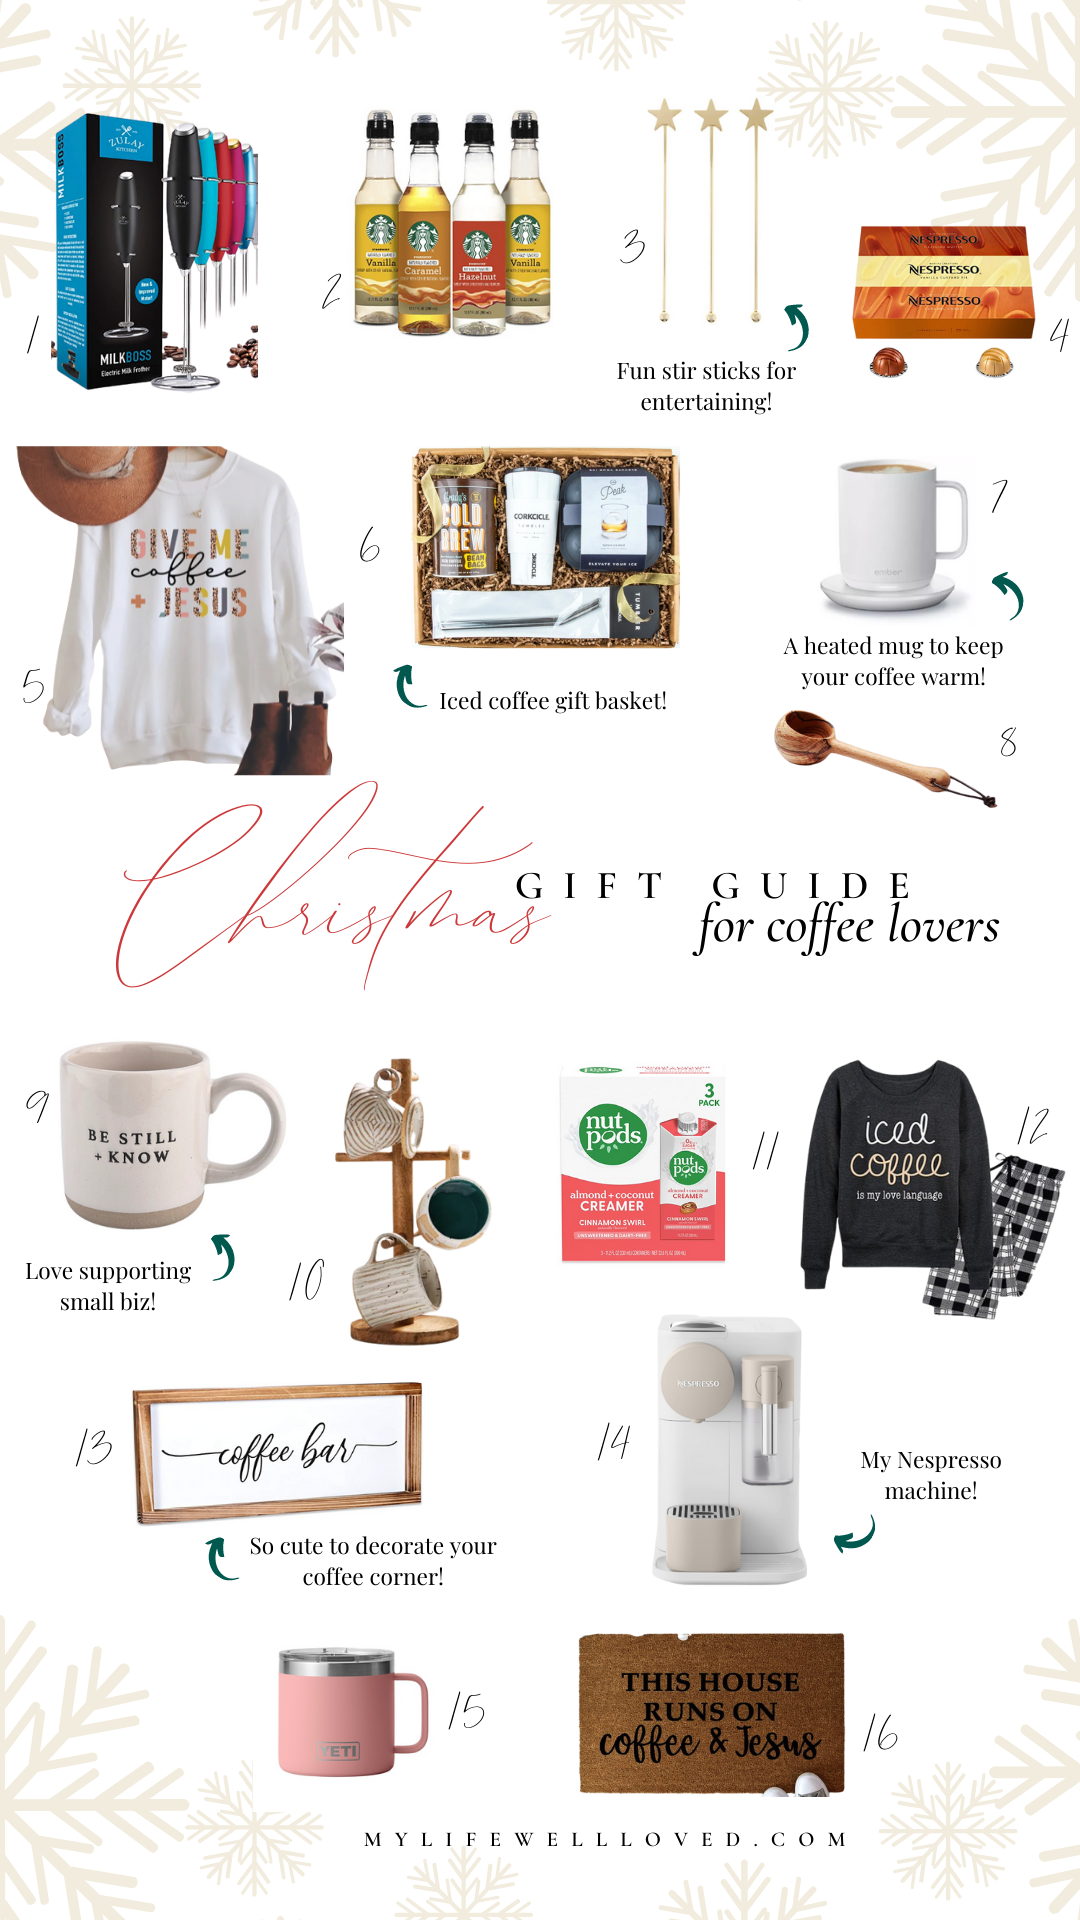 https://www.mylifewellloved.com/wp-content/uploads/Coffee-Lovers-gift-guide-2021.png